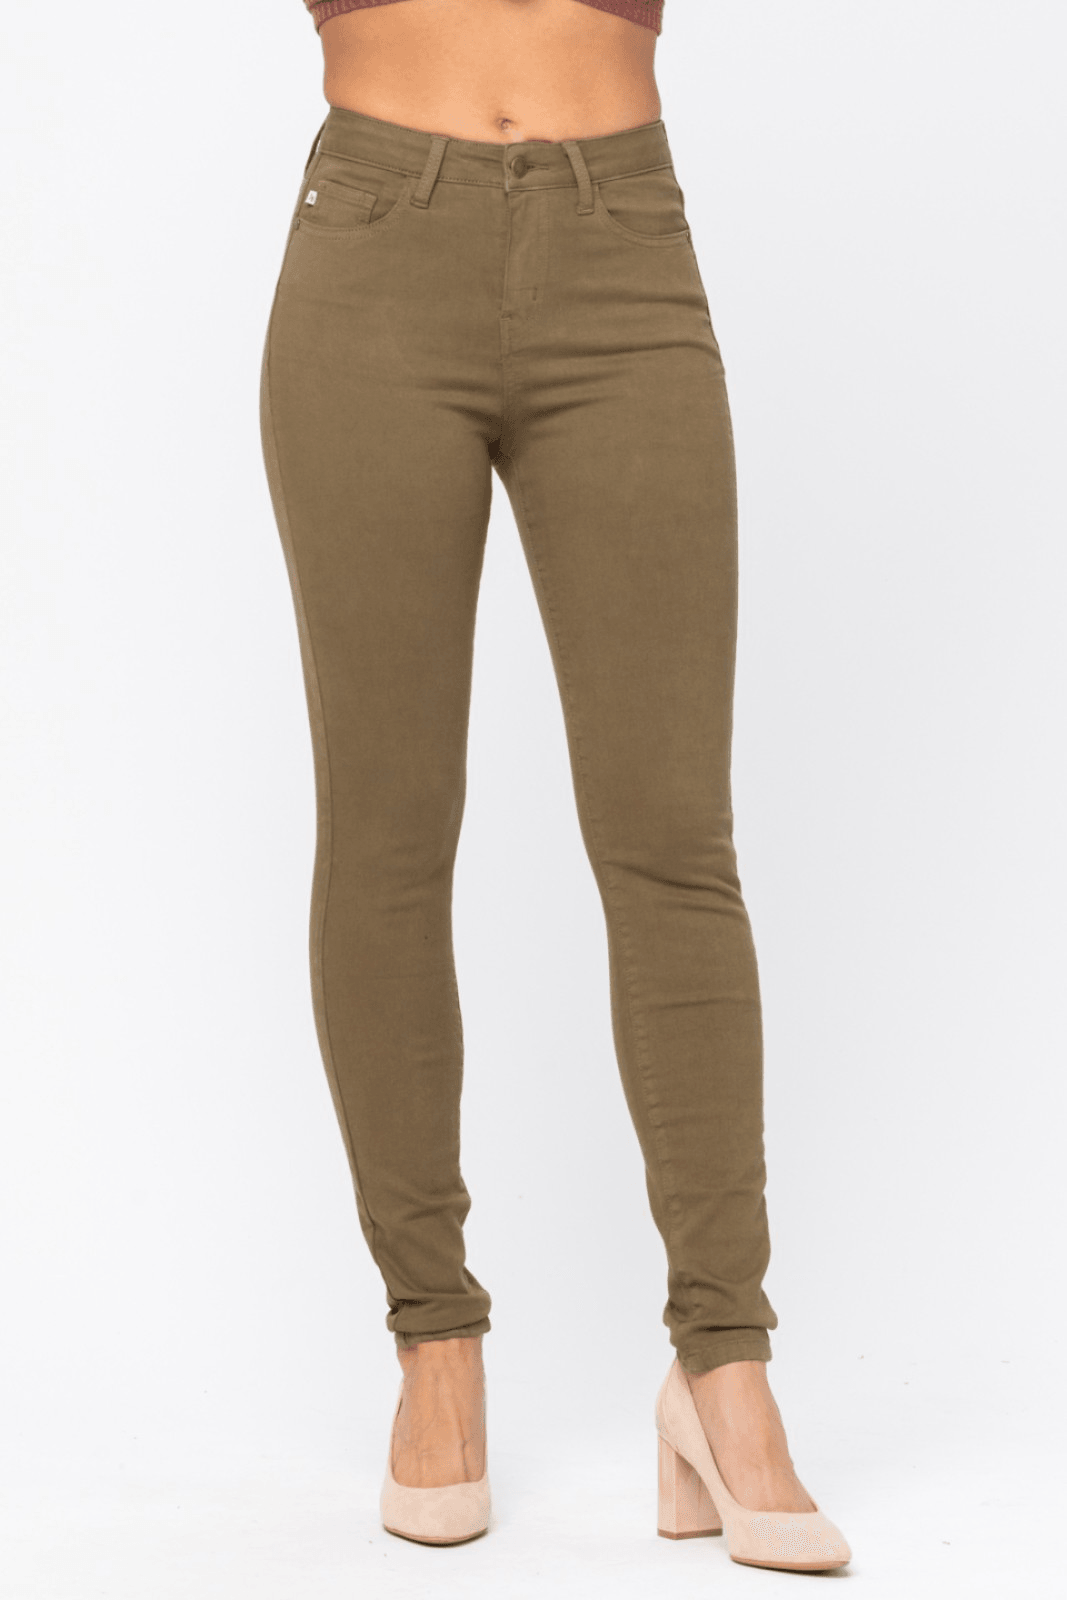 Olive Mid Rise Skinny Jeans - Lady Dorothy Boutique